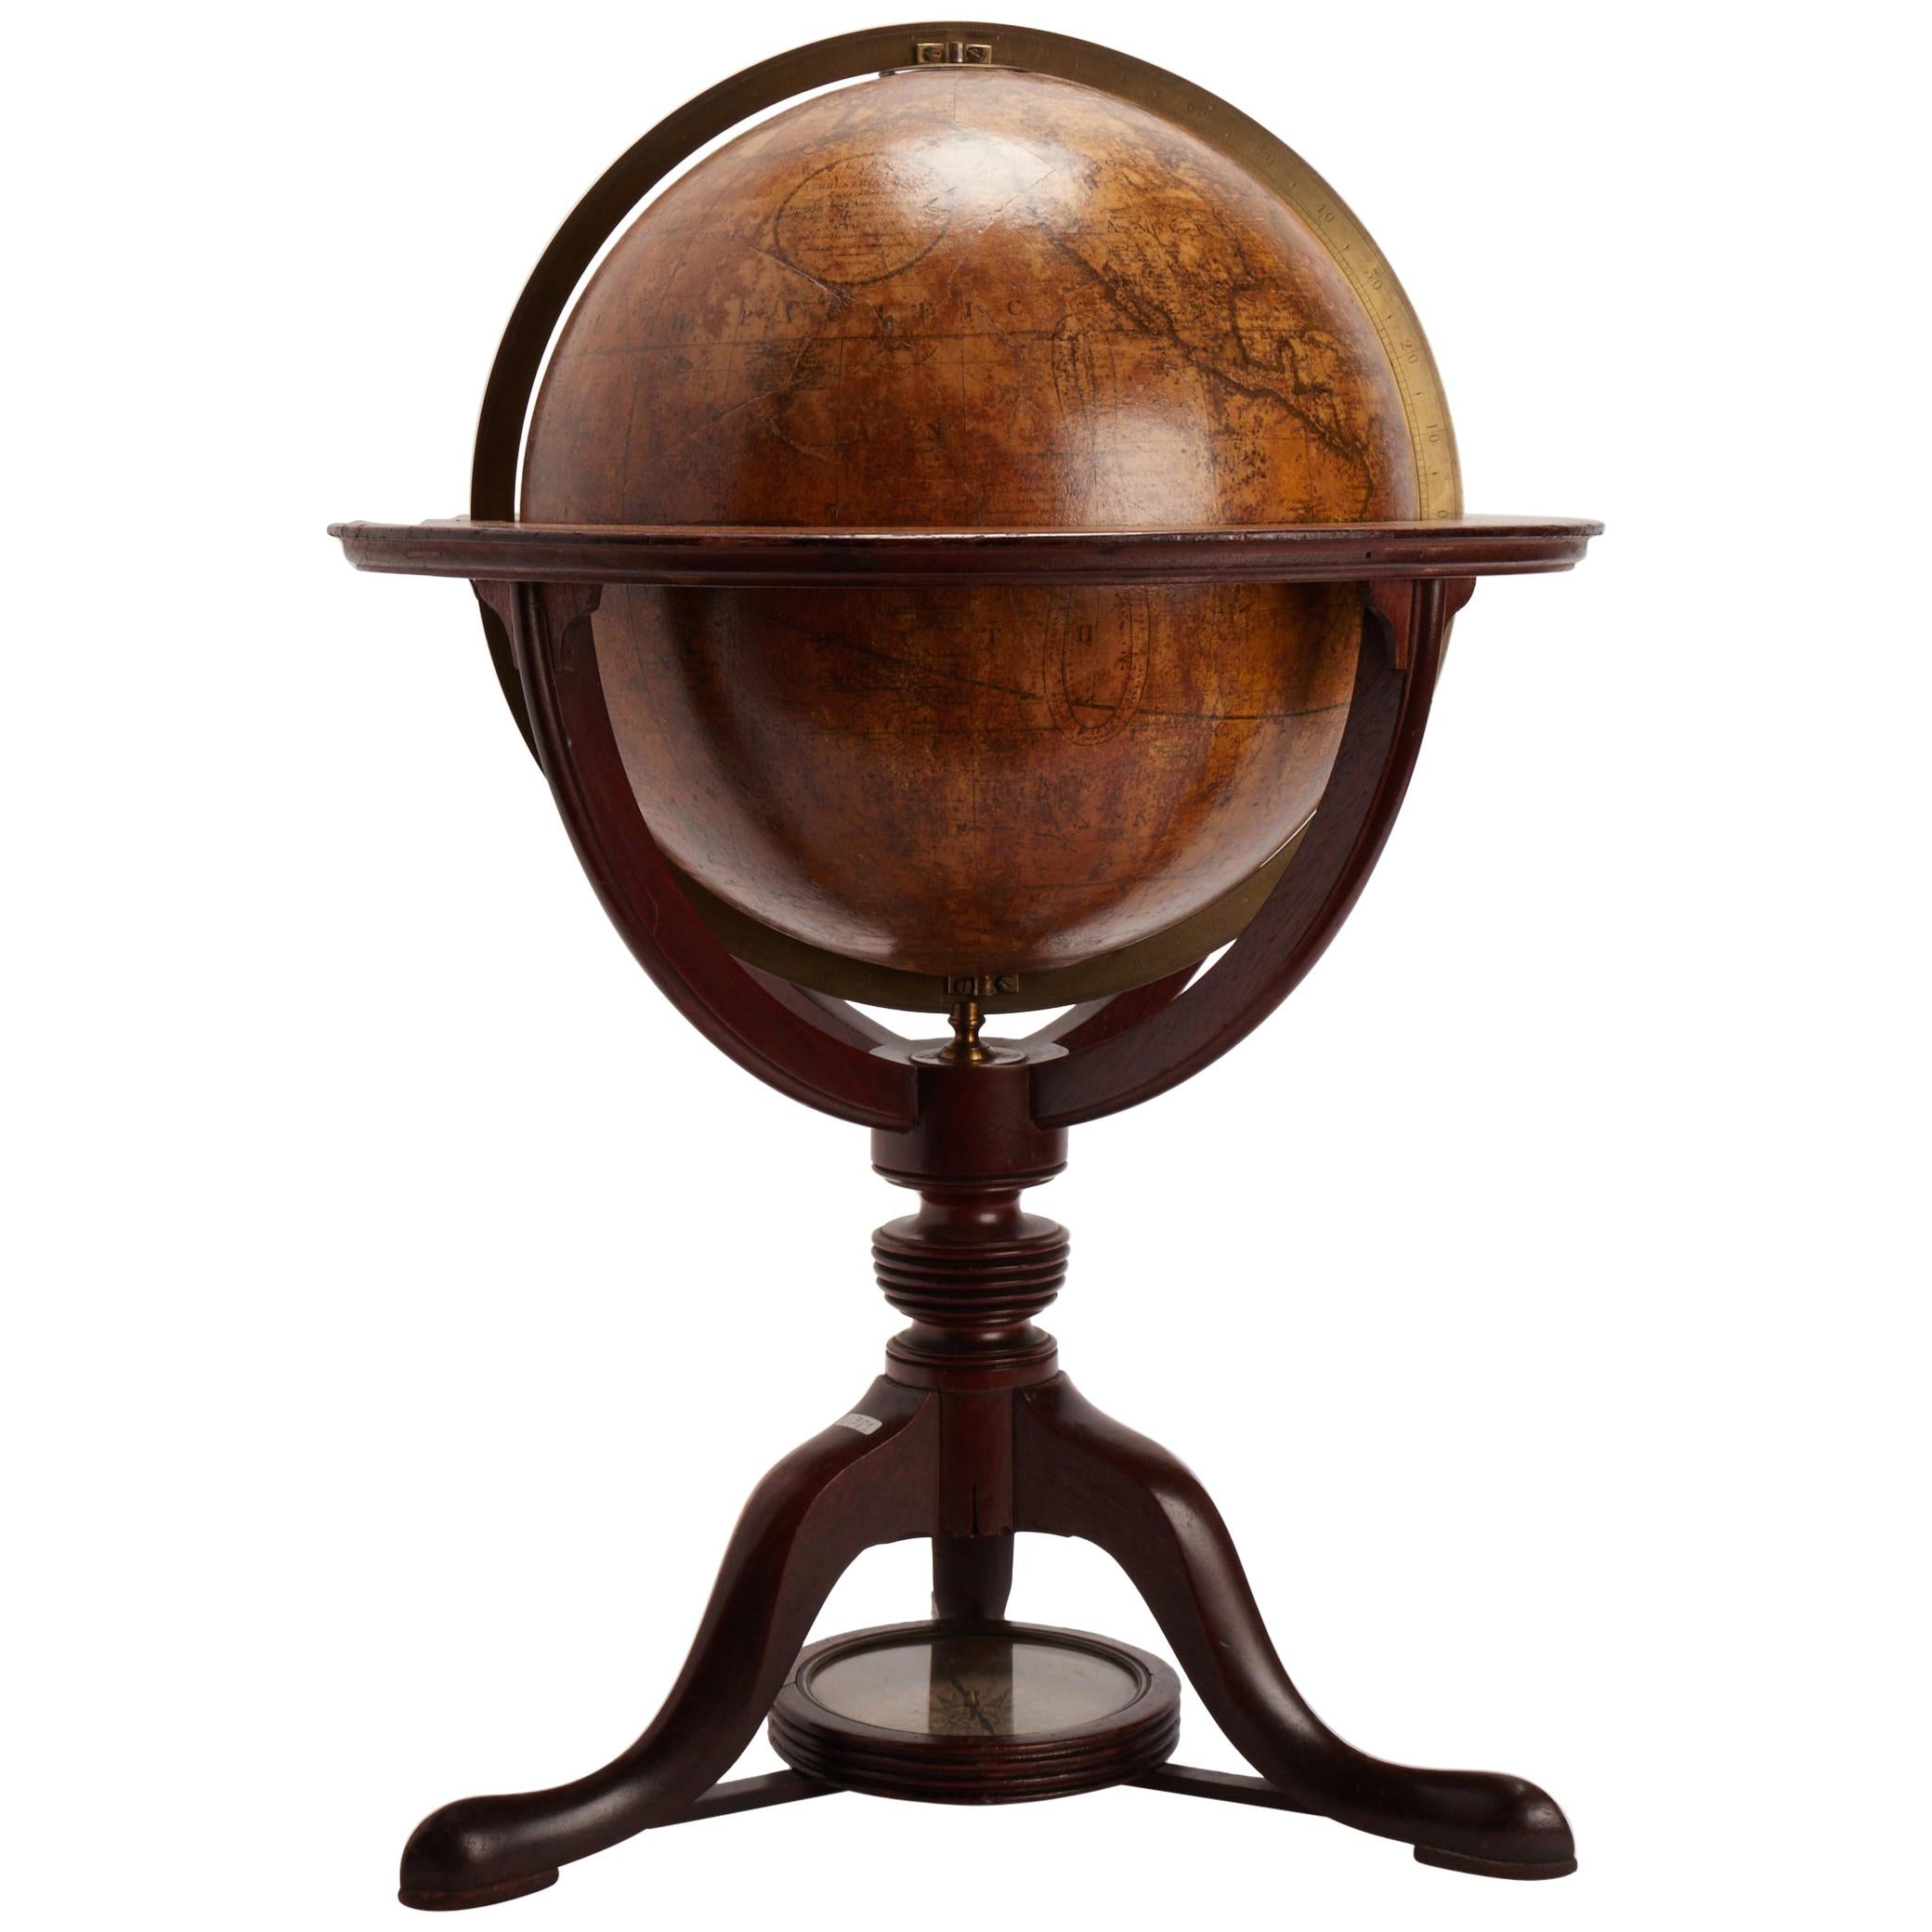 Terrestrial Globe Signed Cary, London, 1798